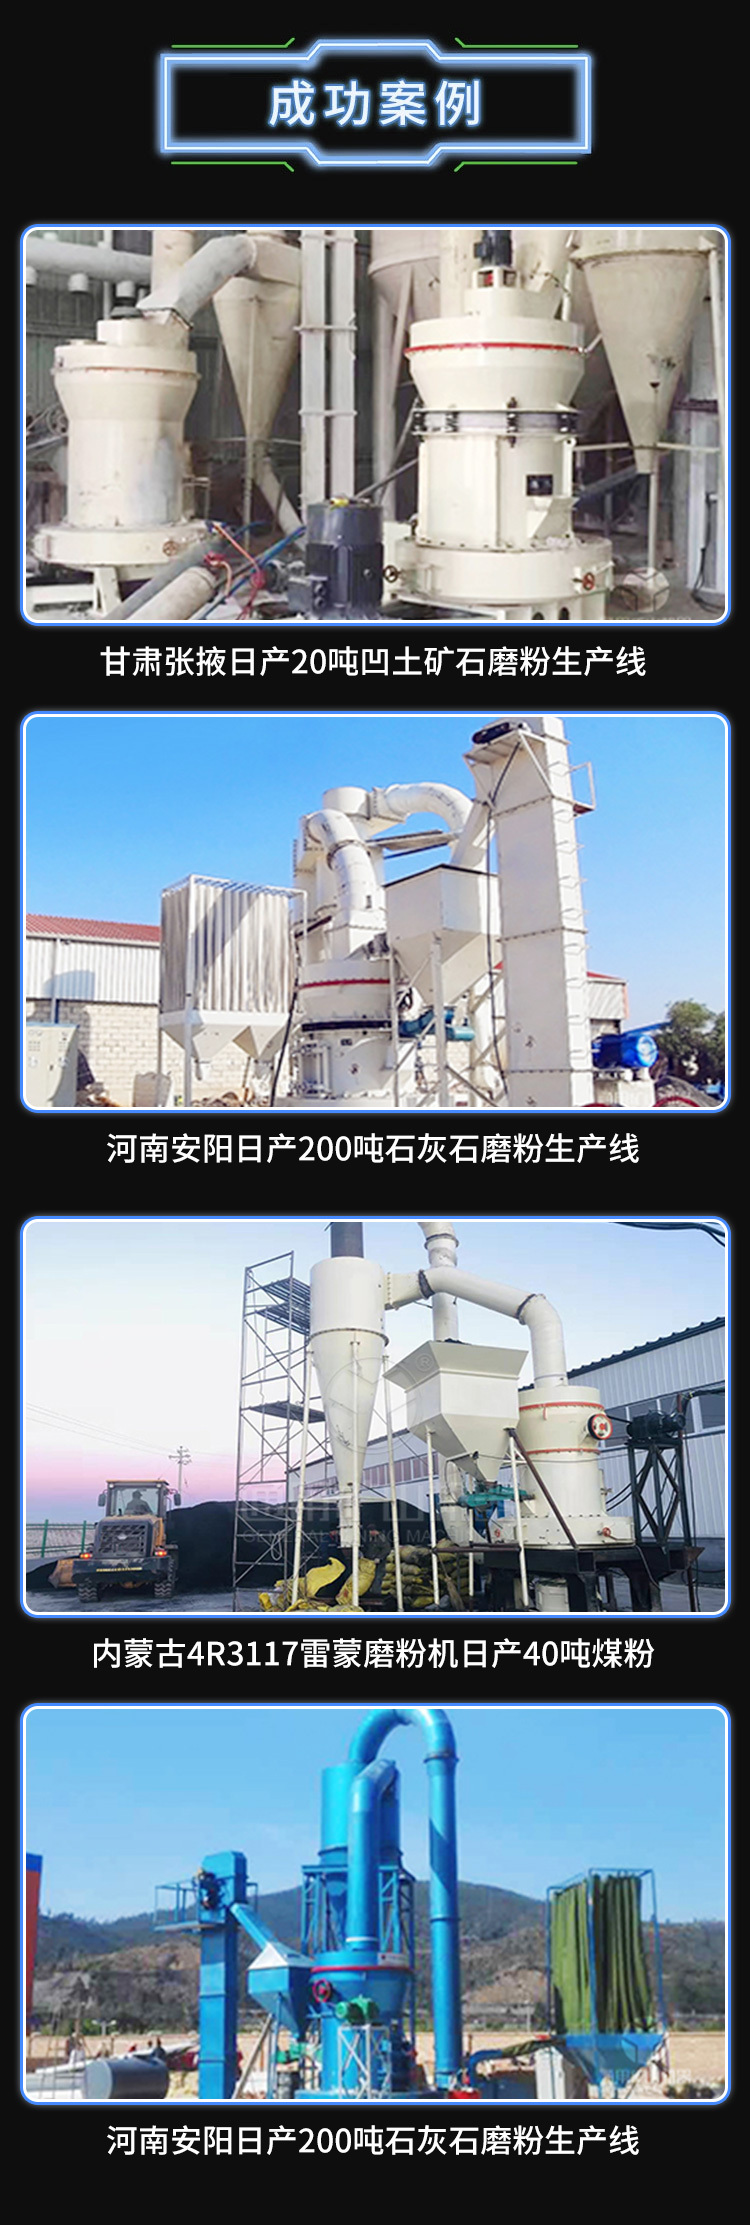 Design of Large Scale Environmental Protection Raymond Mill Low Energy Consumption Professional Kaolin Grinding Machine Production Line